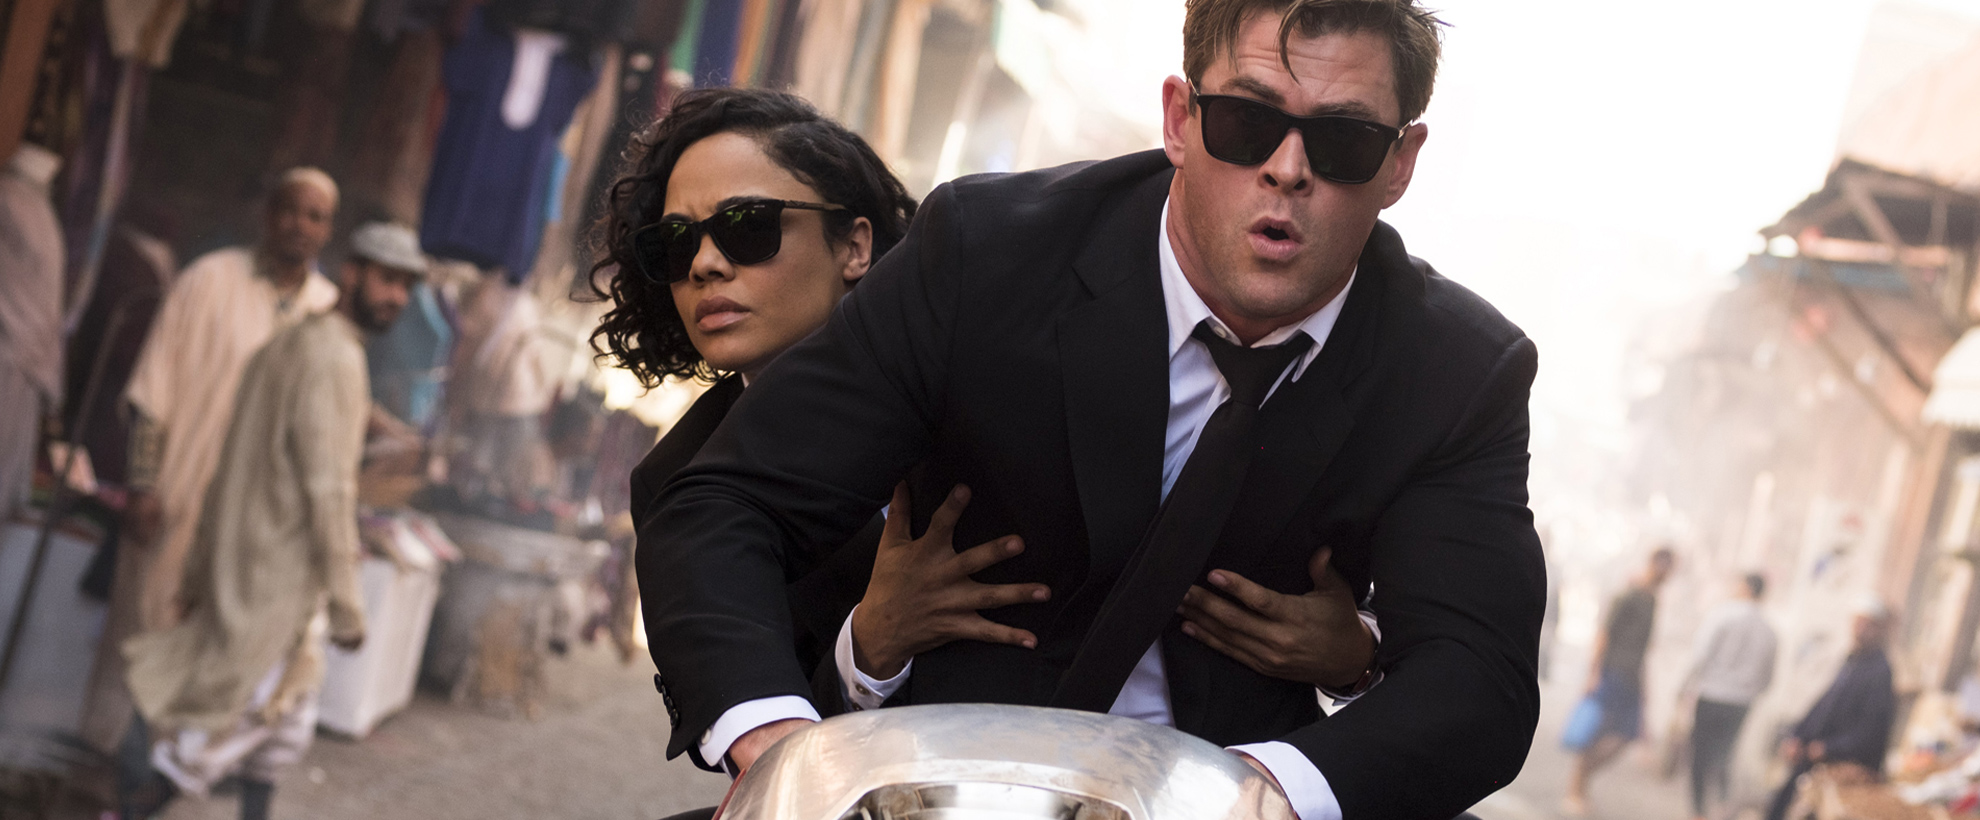 Chris Hemsworth and Tessa Thompson ride a motorbike, wearing black suits and sunglasses